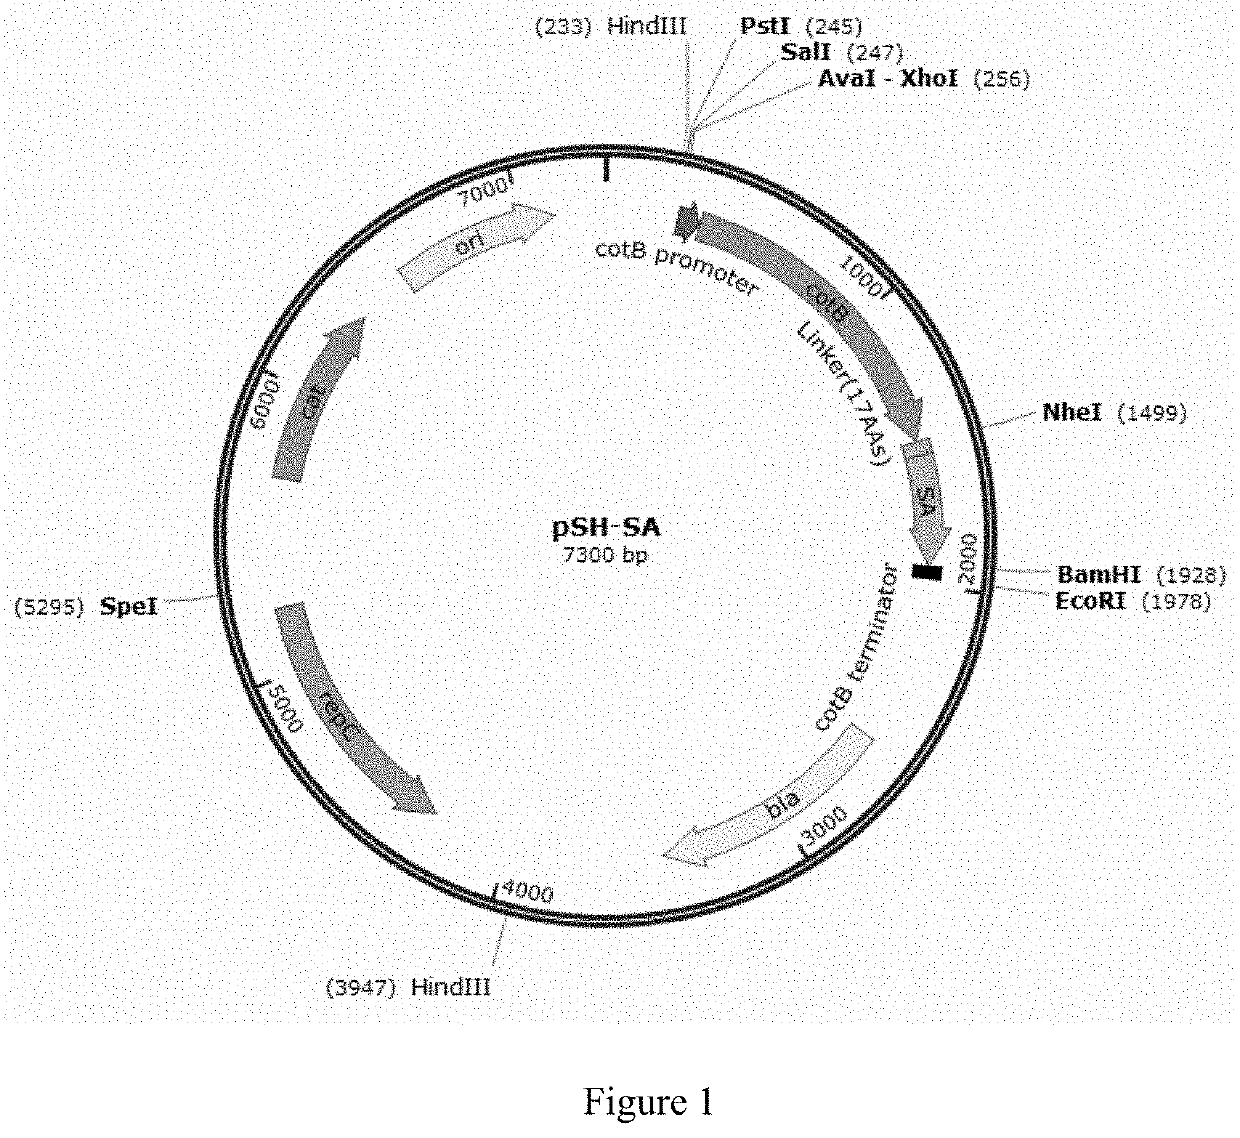 Methods of detection of compound, antibody or protein using recombinant endospores or bacteria as sensing element